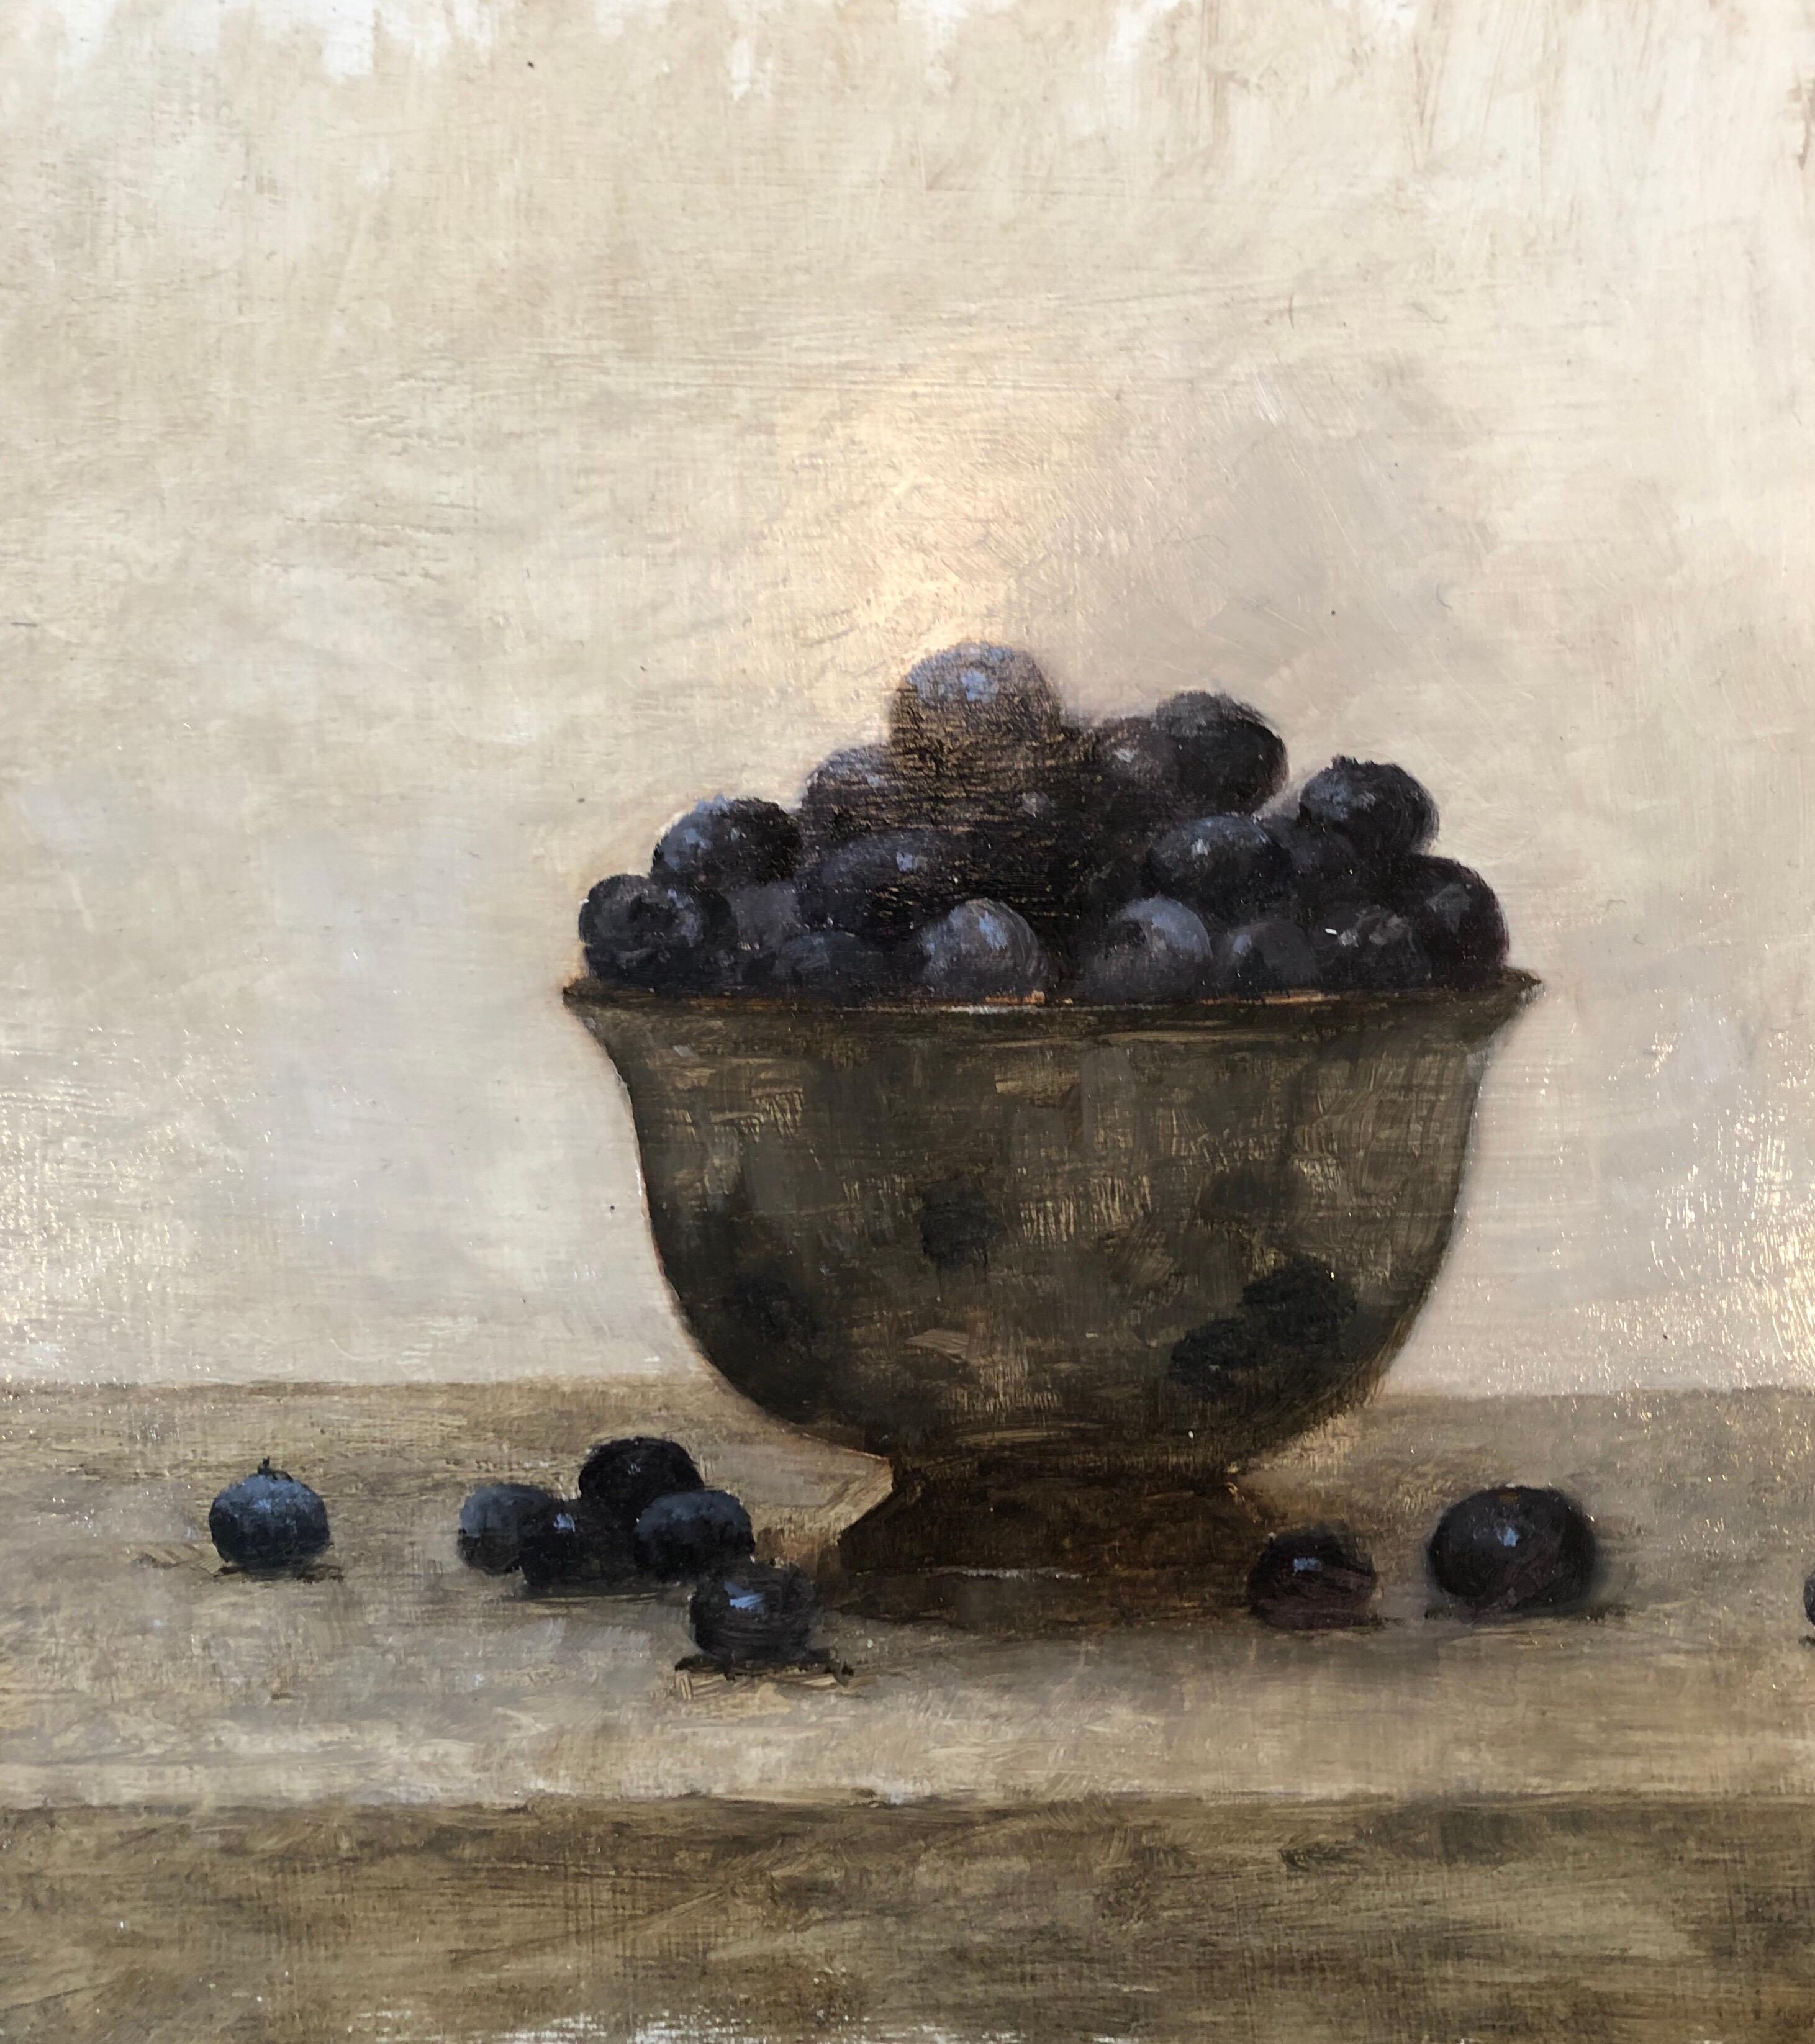 A gem of a little still life, smartly framed in a minimal black frame is this oil painting on panel of blueberries in a pewter bowl. Beauty is simplicity reigns in this quietly commanding piece.

Born in New York, Dale’s earliest memories of